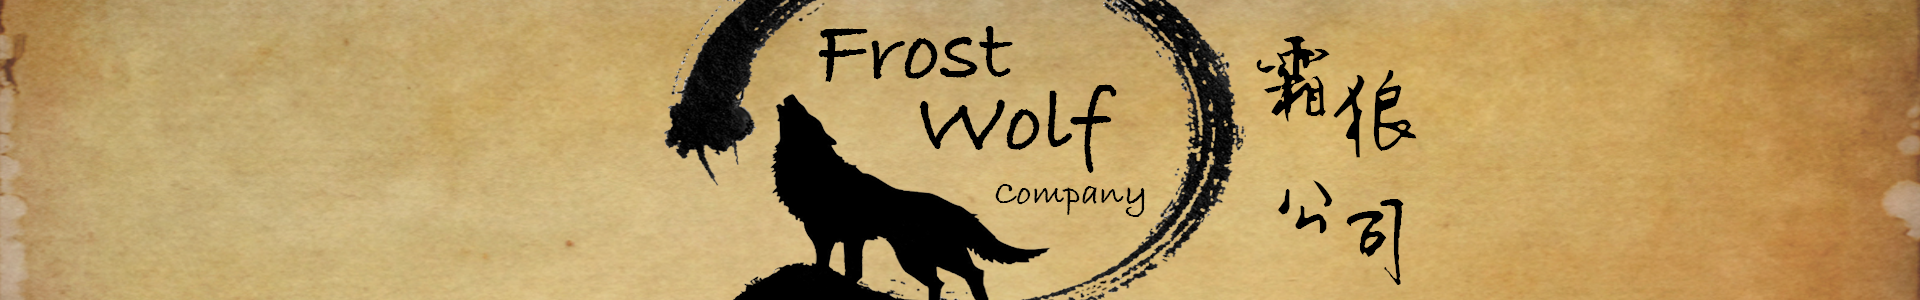 Frost Wolf Co.